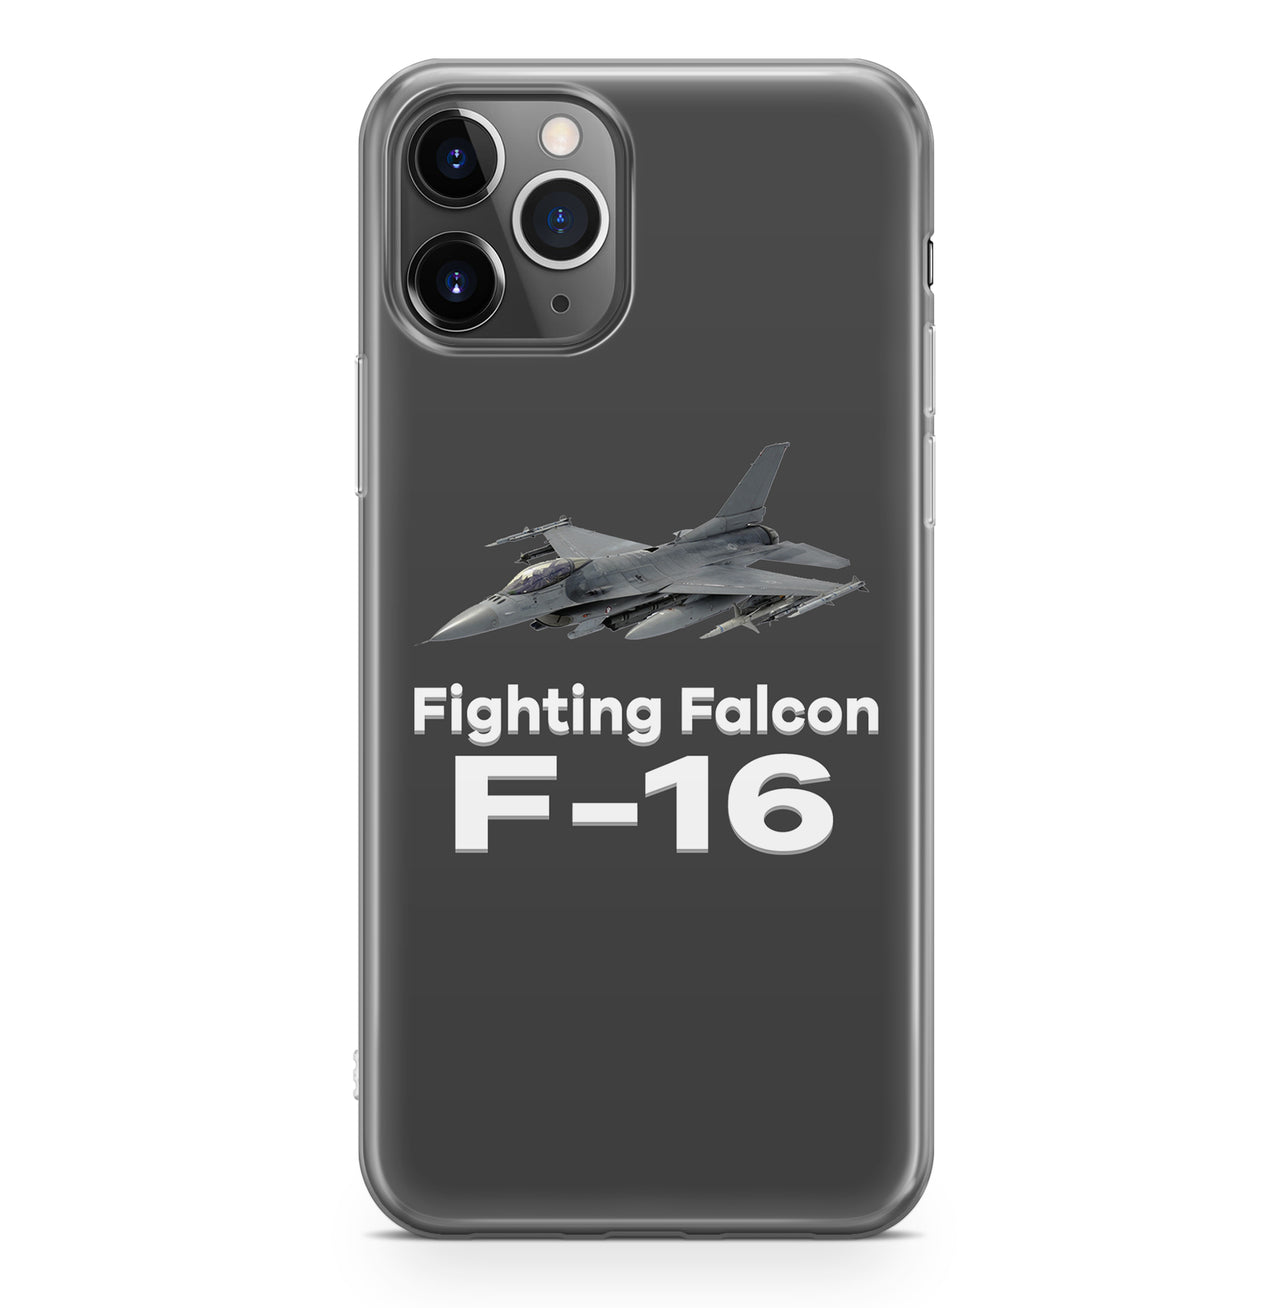 The Fighting Falcon F16 Designed iPhone Cases